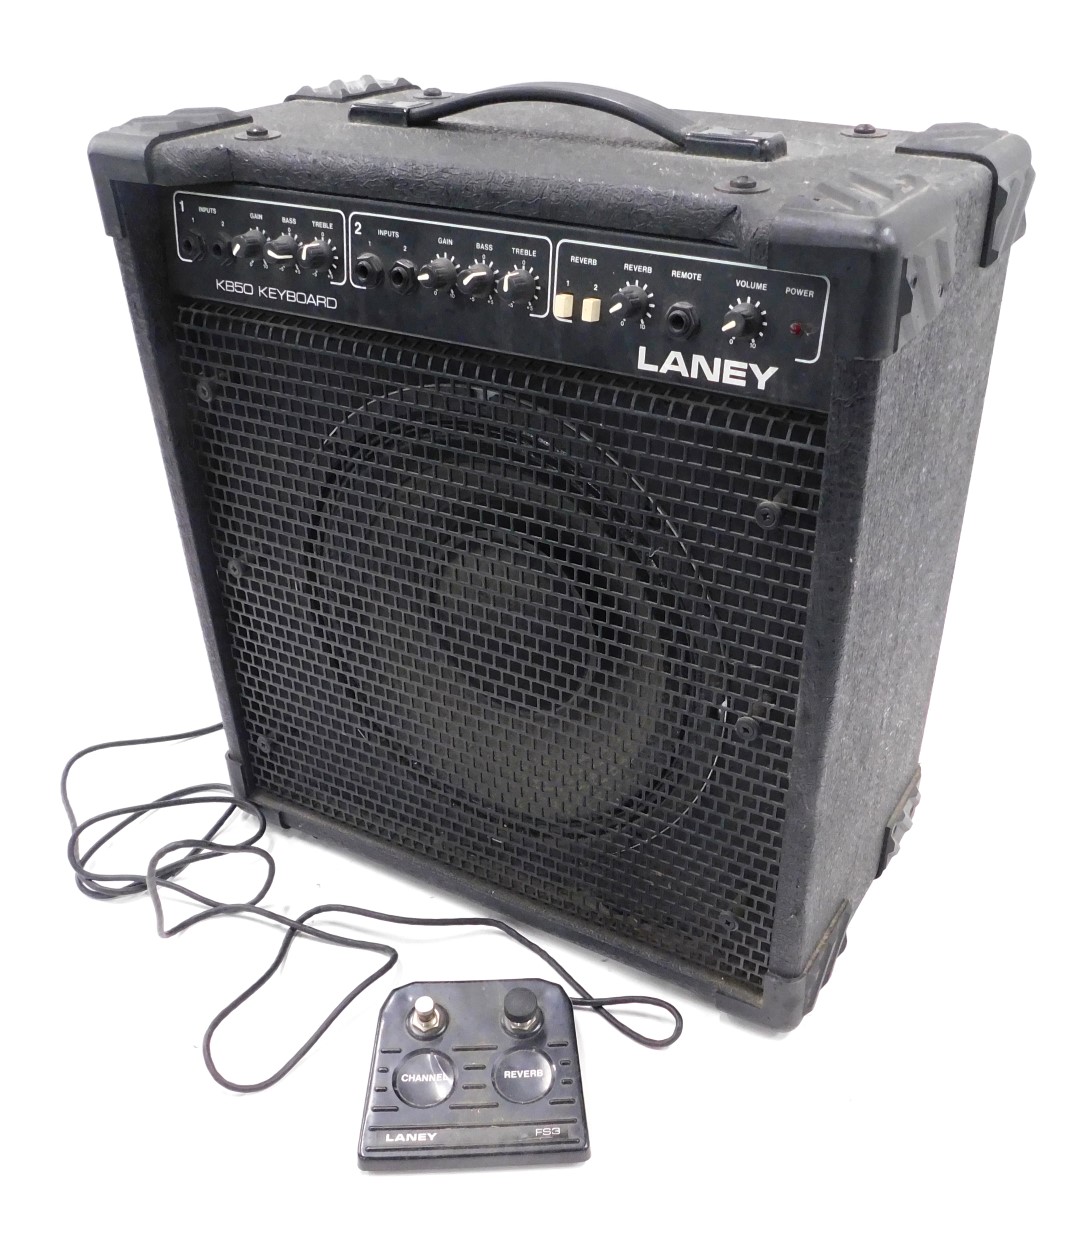 A Laney KB50 keyboard amp, with Laney FS3 pedal and power lead.